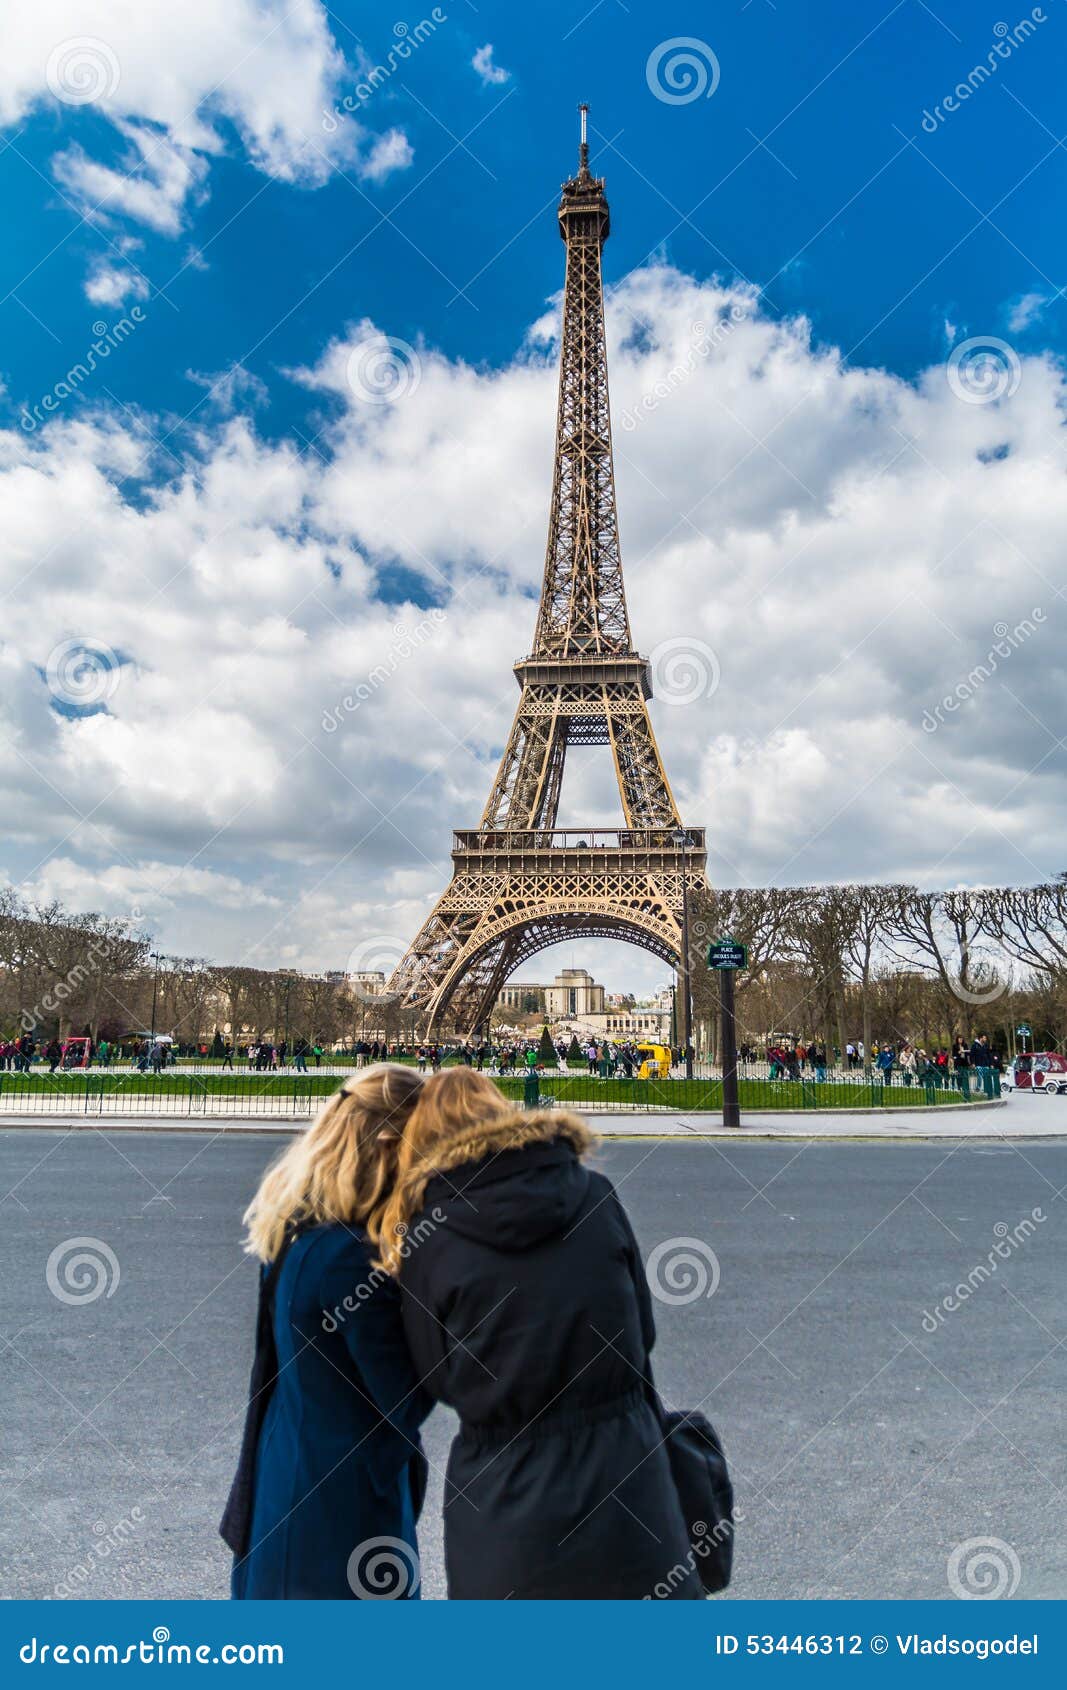 two blurry blonde tourist girls silhouette over eiffel tower in paris